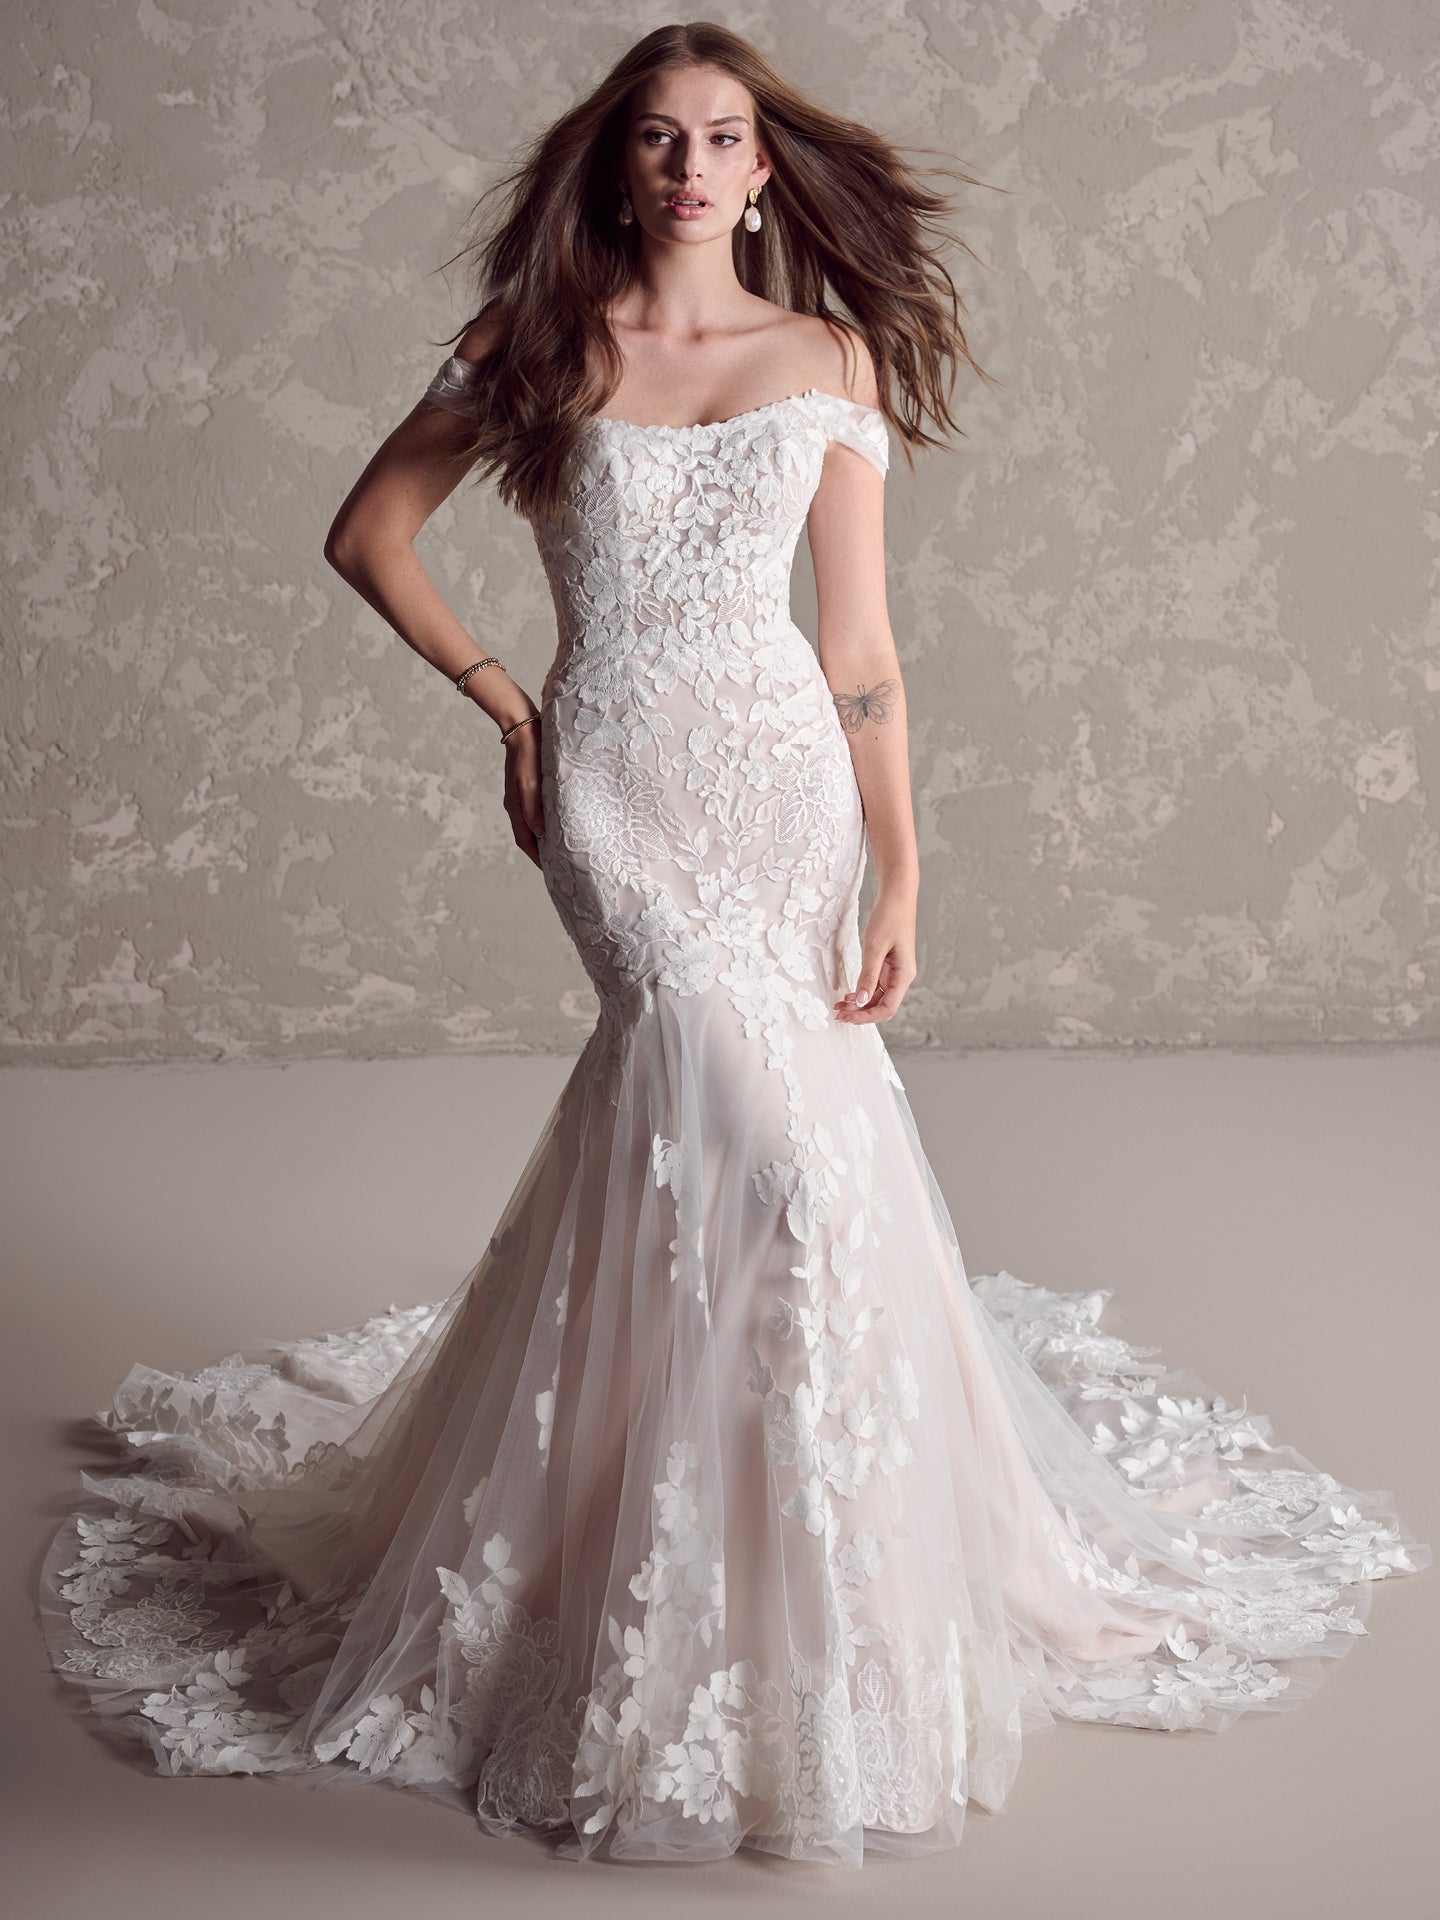 Off-the-Shoulder Floral Fit-and-Flare Gown by Maggie Sottero - Image 1